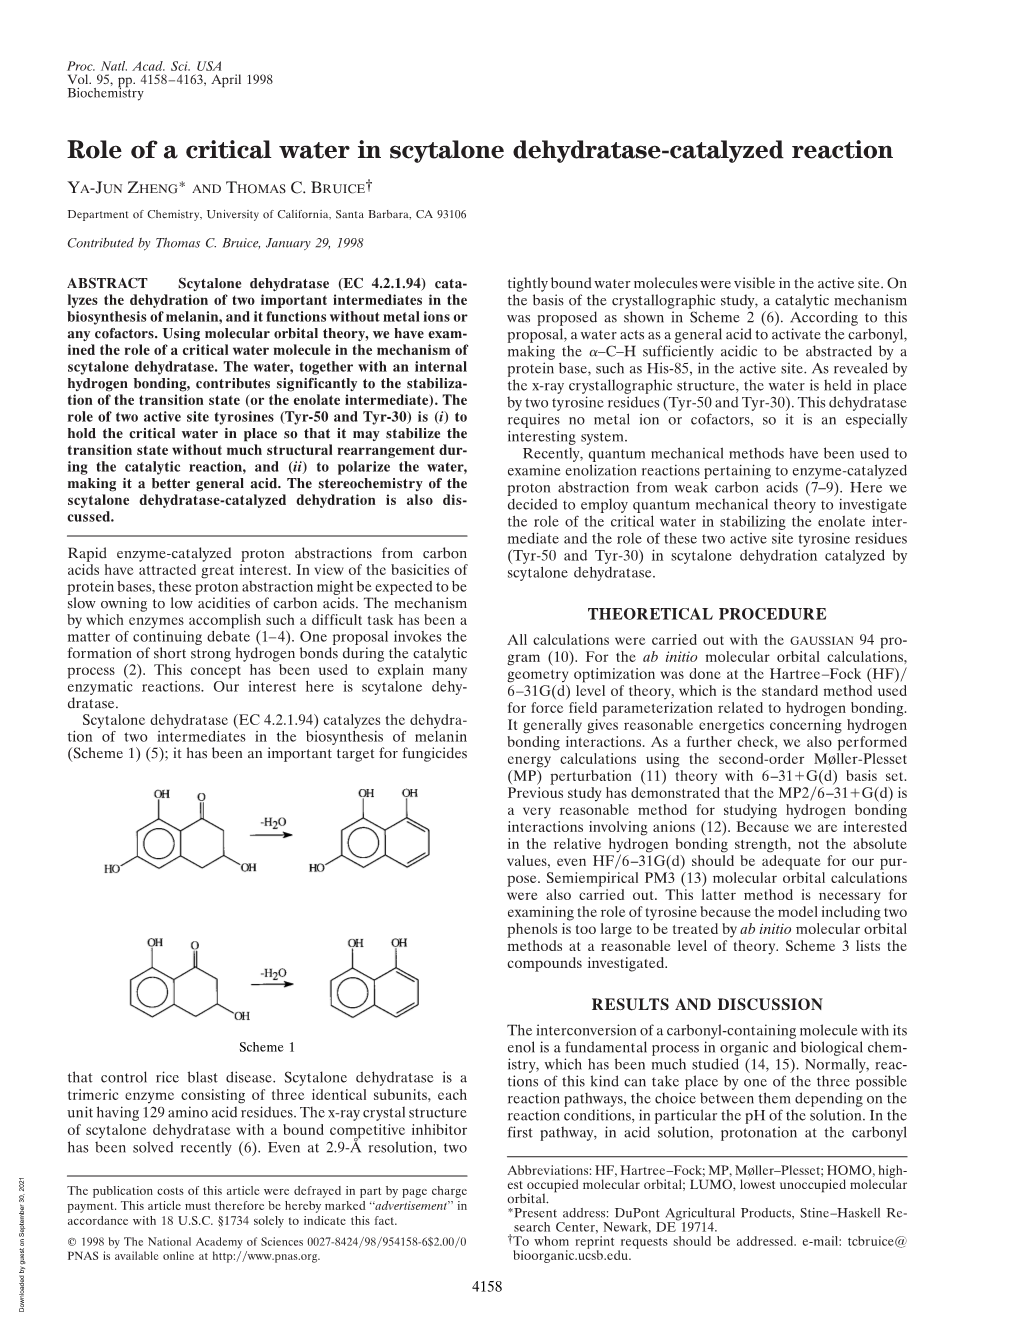 Role of a Critical Water in Scytalone Dehydratase-Catalyzed Reaction